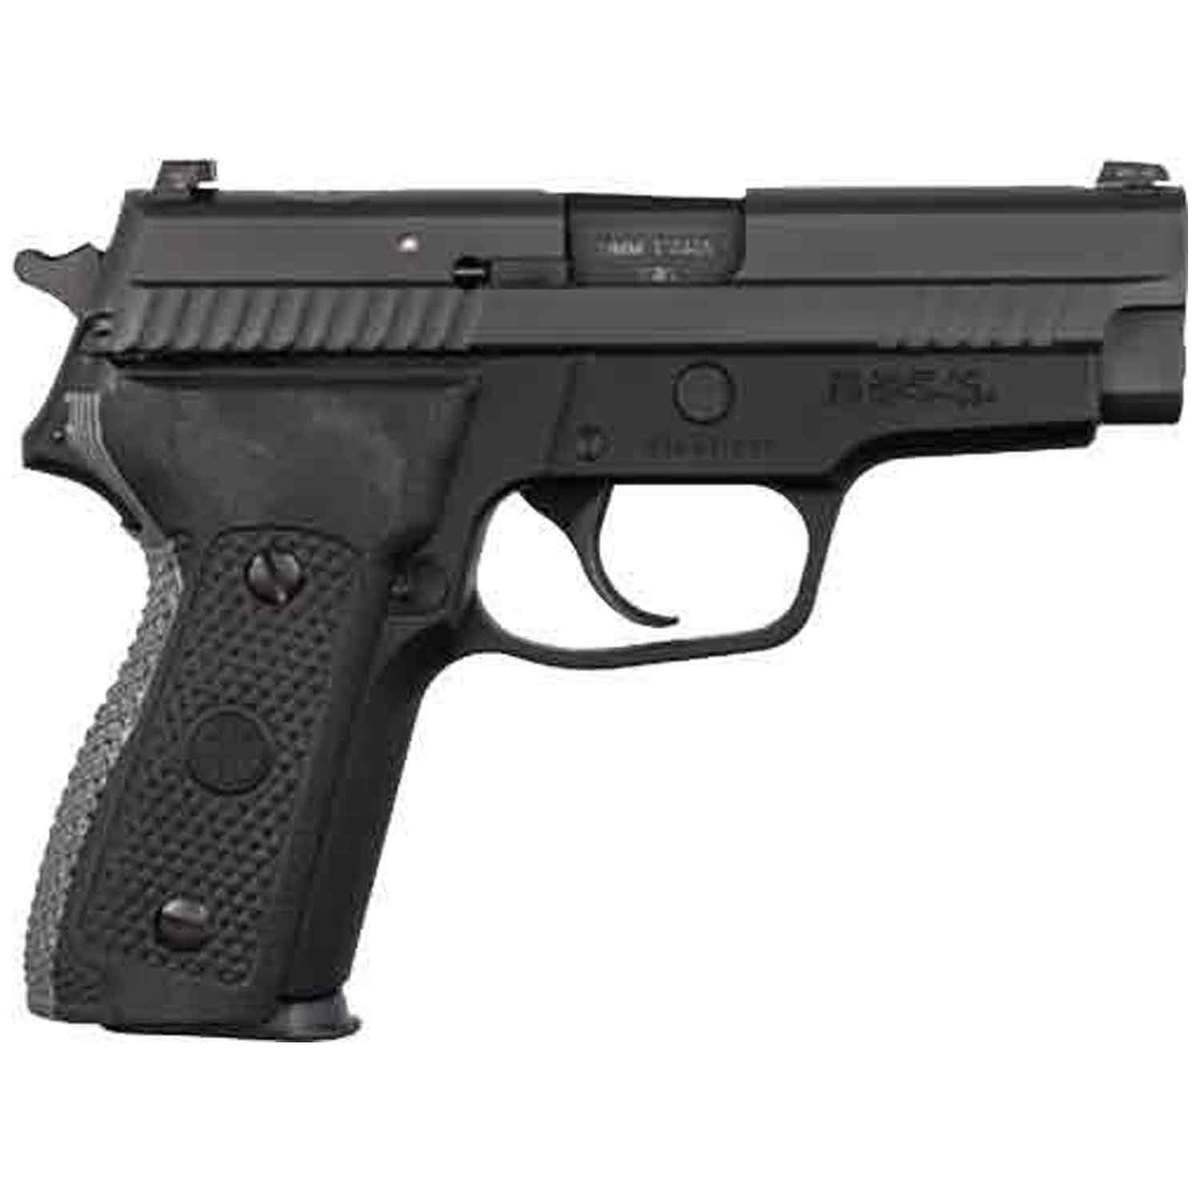 sig sauer p229 carry 9mm luger 39in black nitron pistol 131 rounds 1503665 1 1